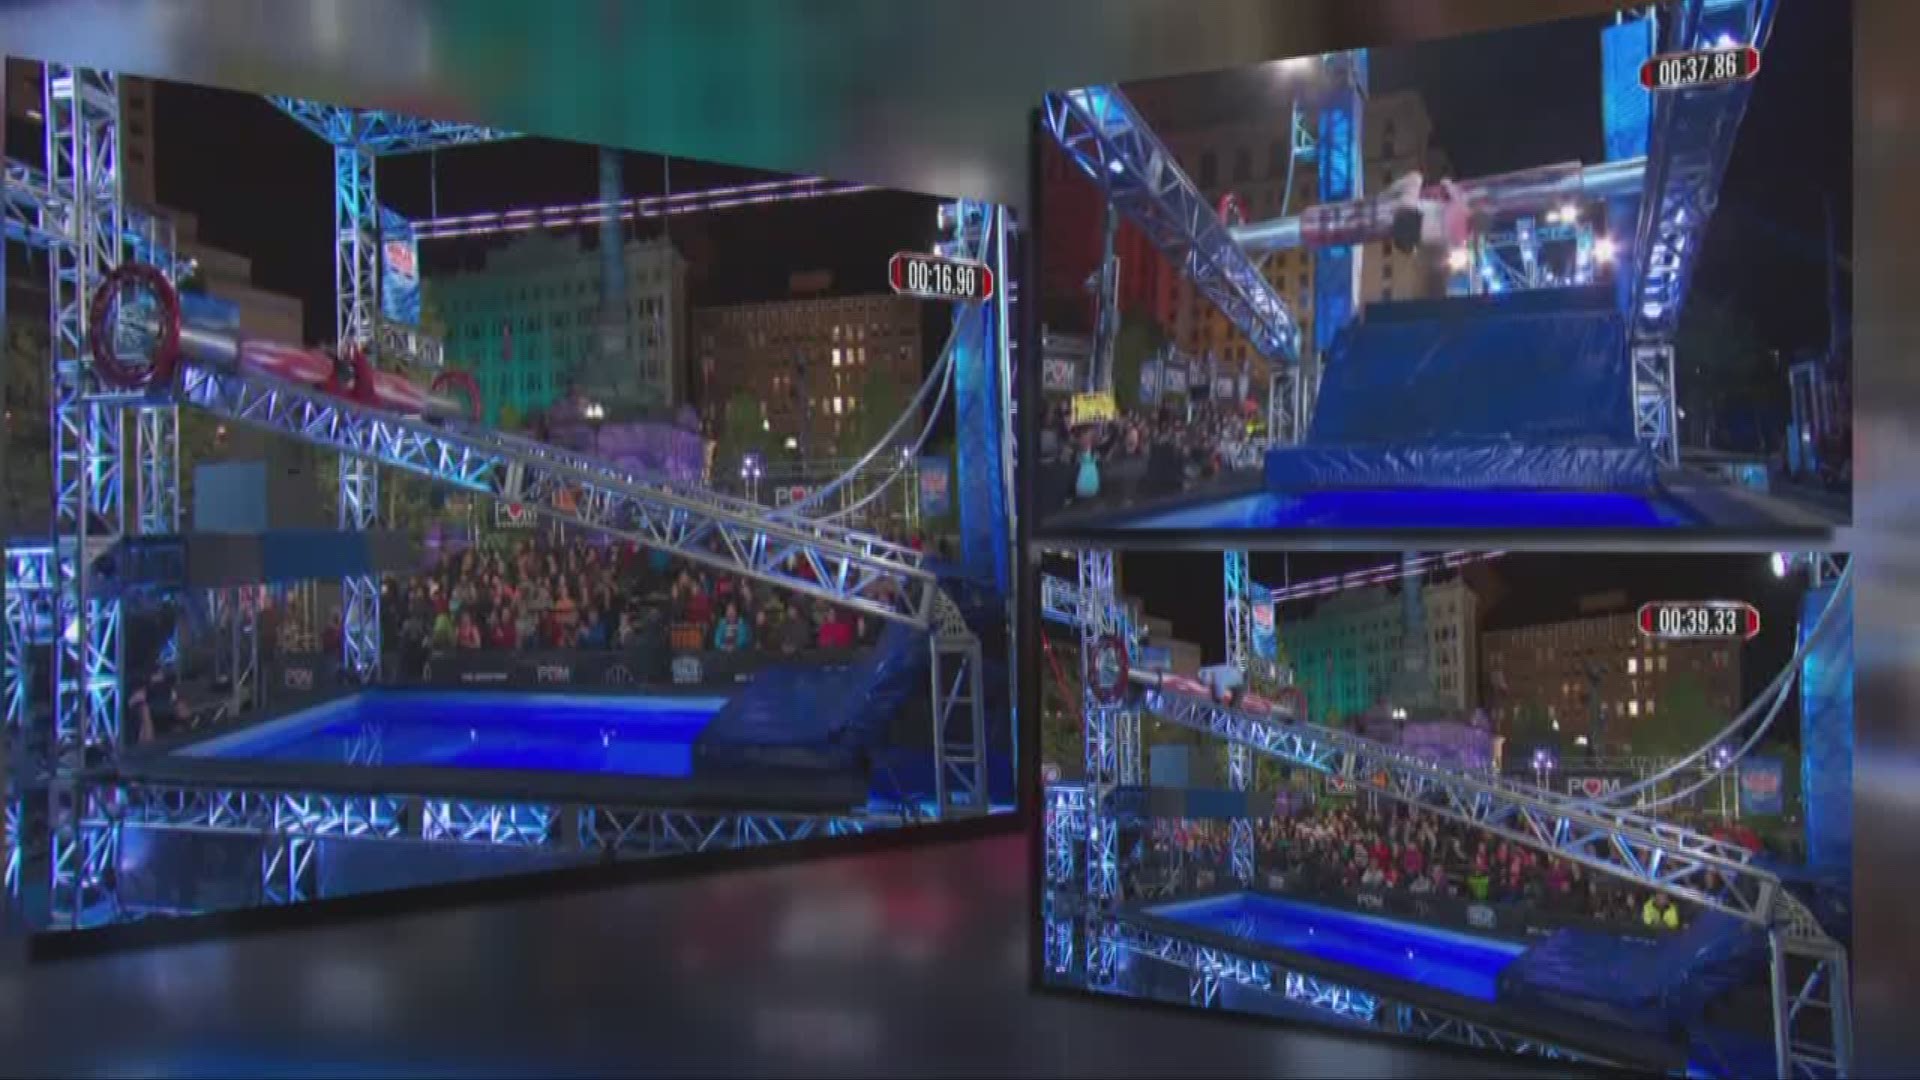 Watch party preview for American Ninja Warrior